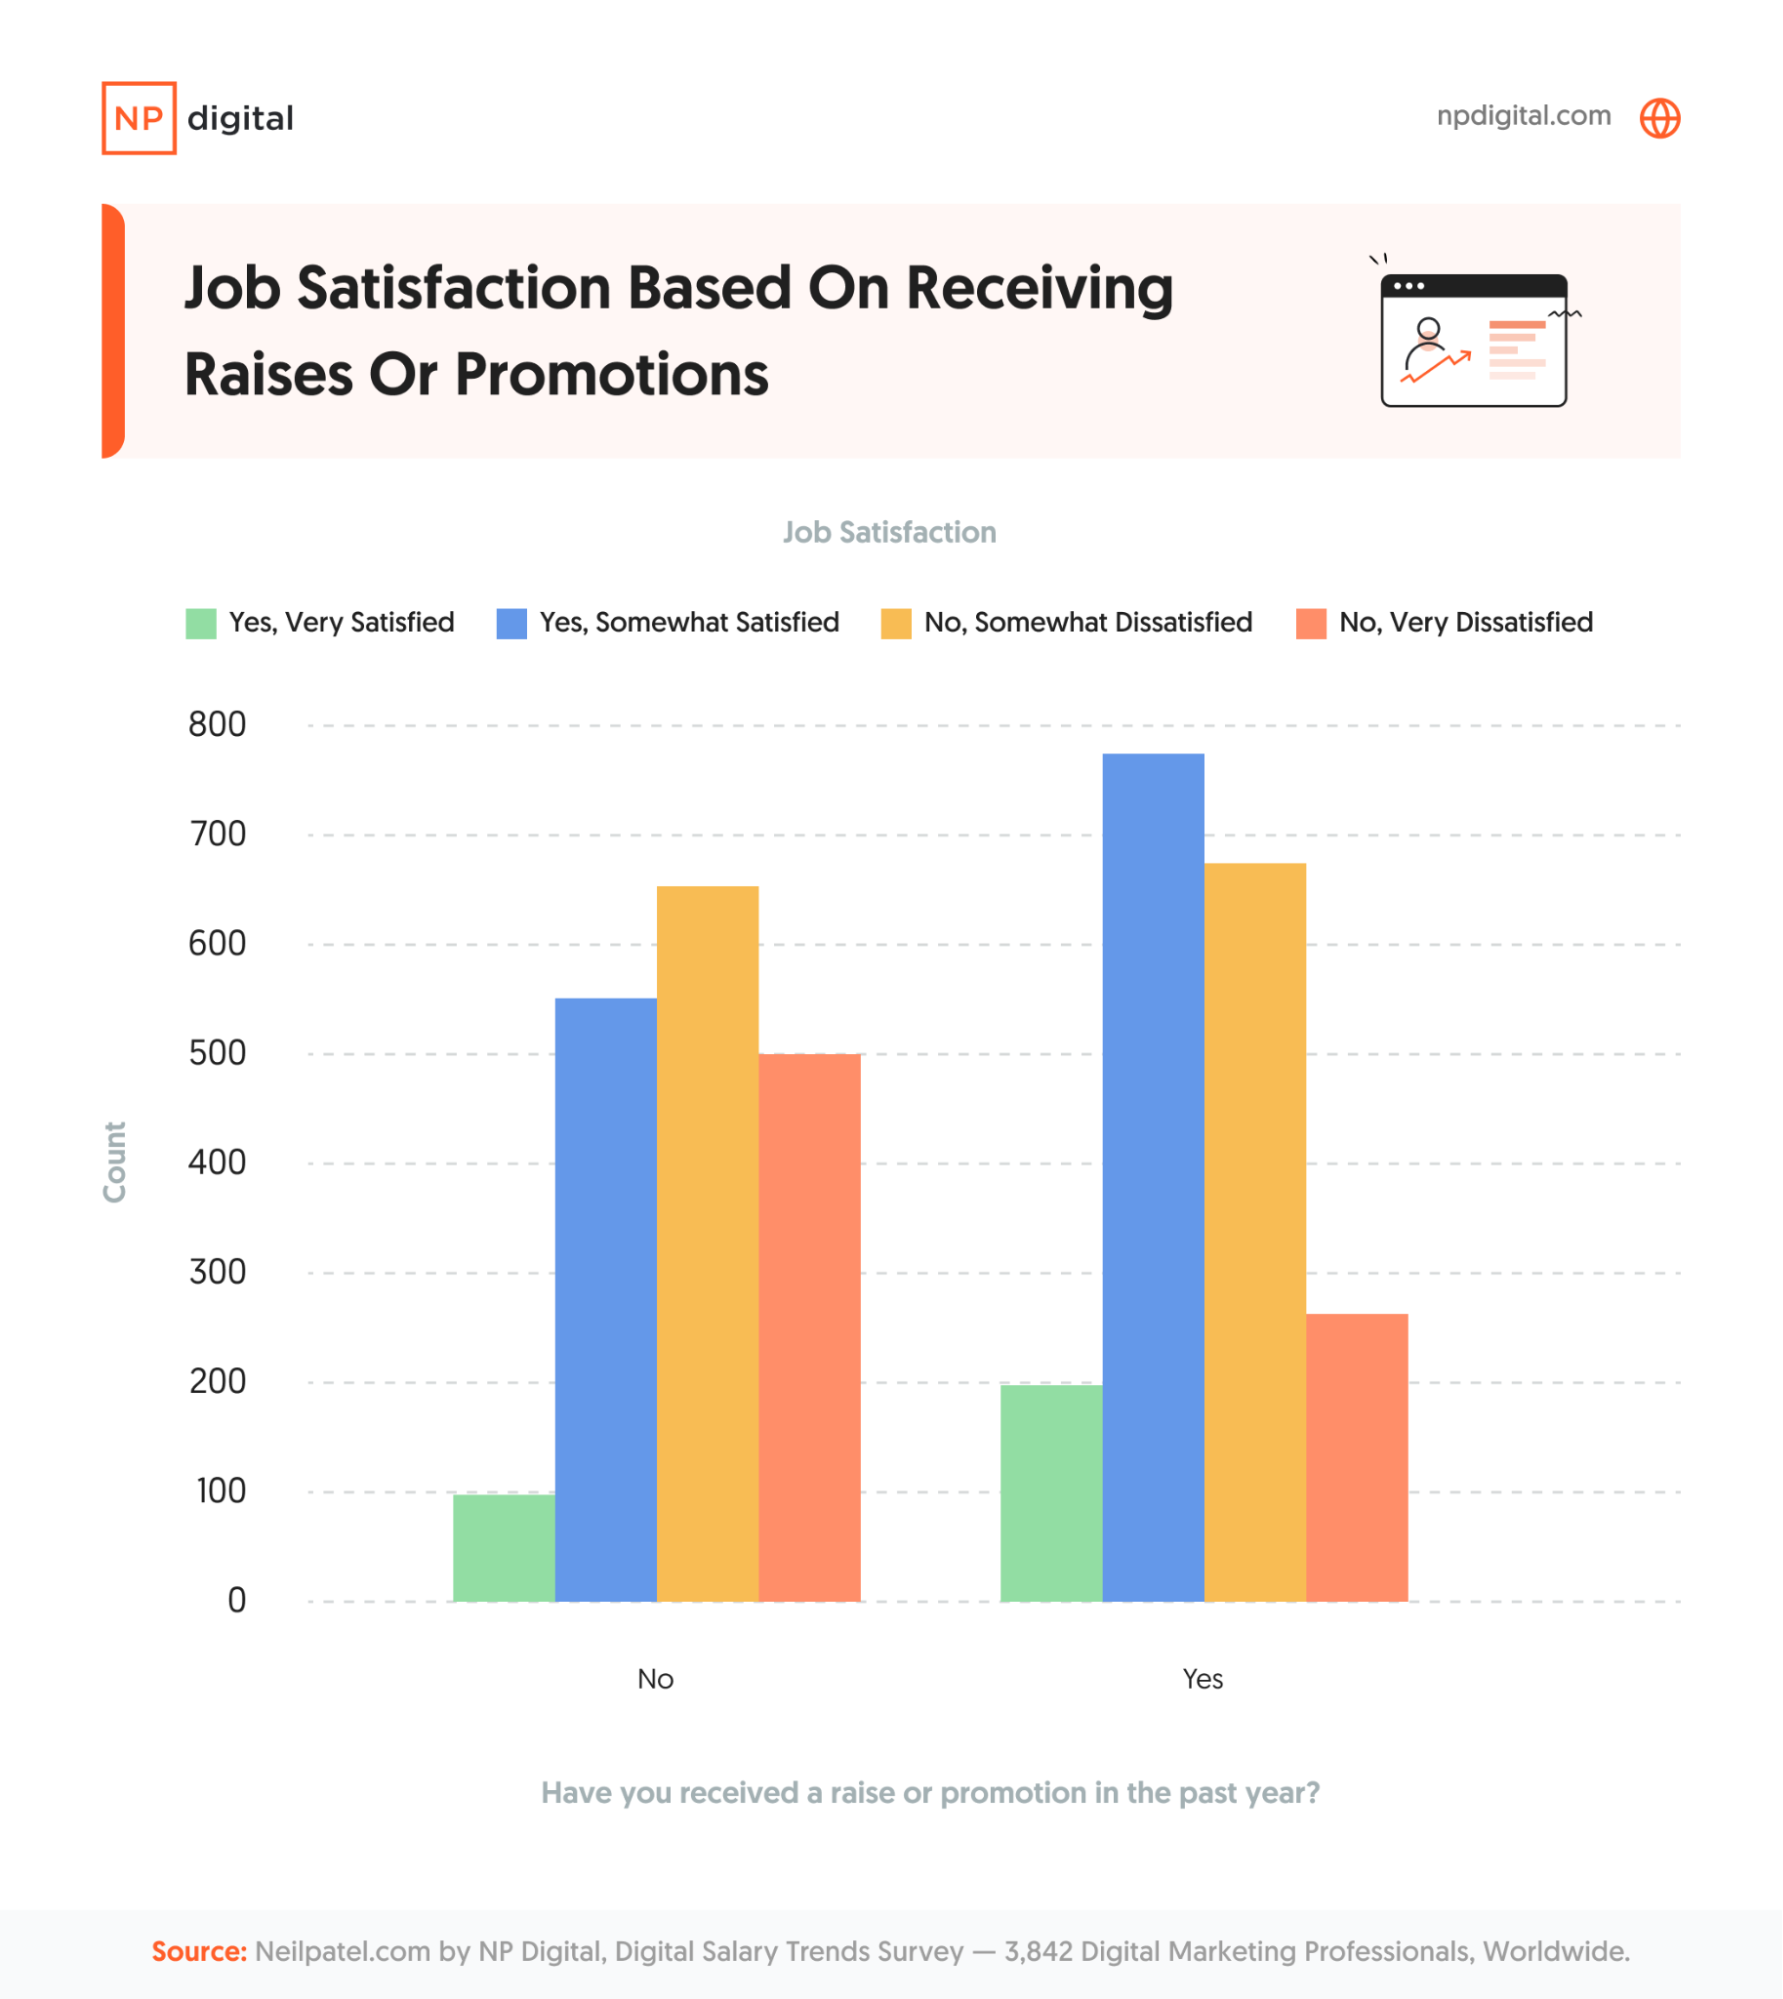 Bar chart showing job satisfaction based on receiving raises or promotions